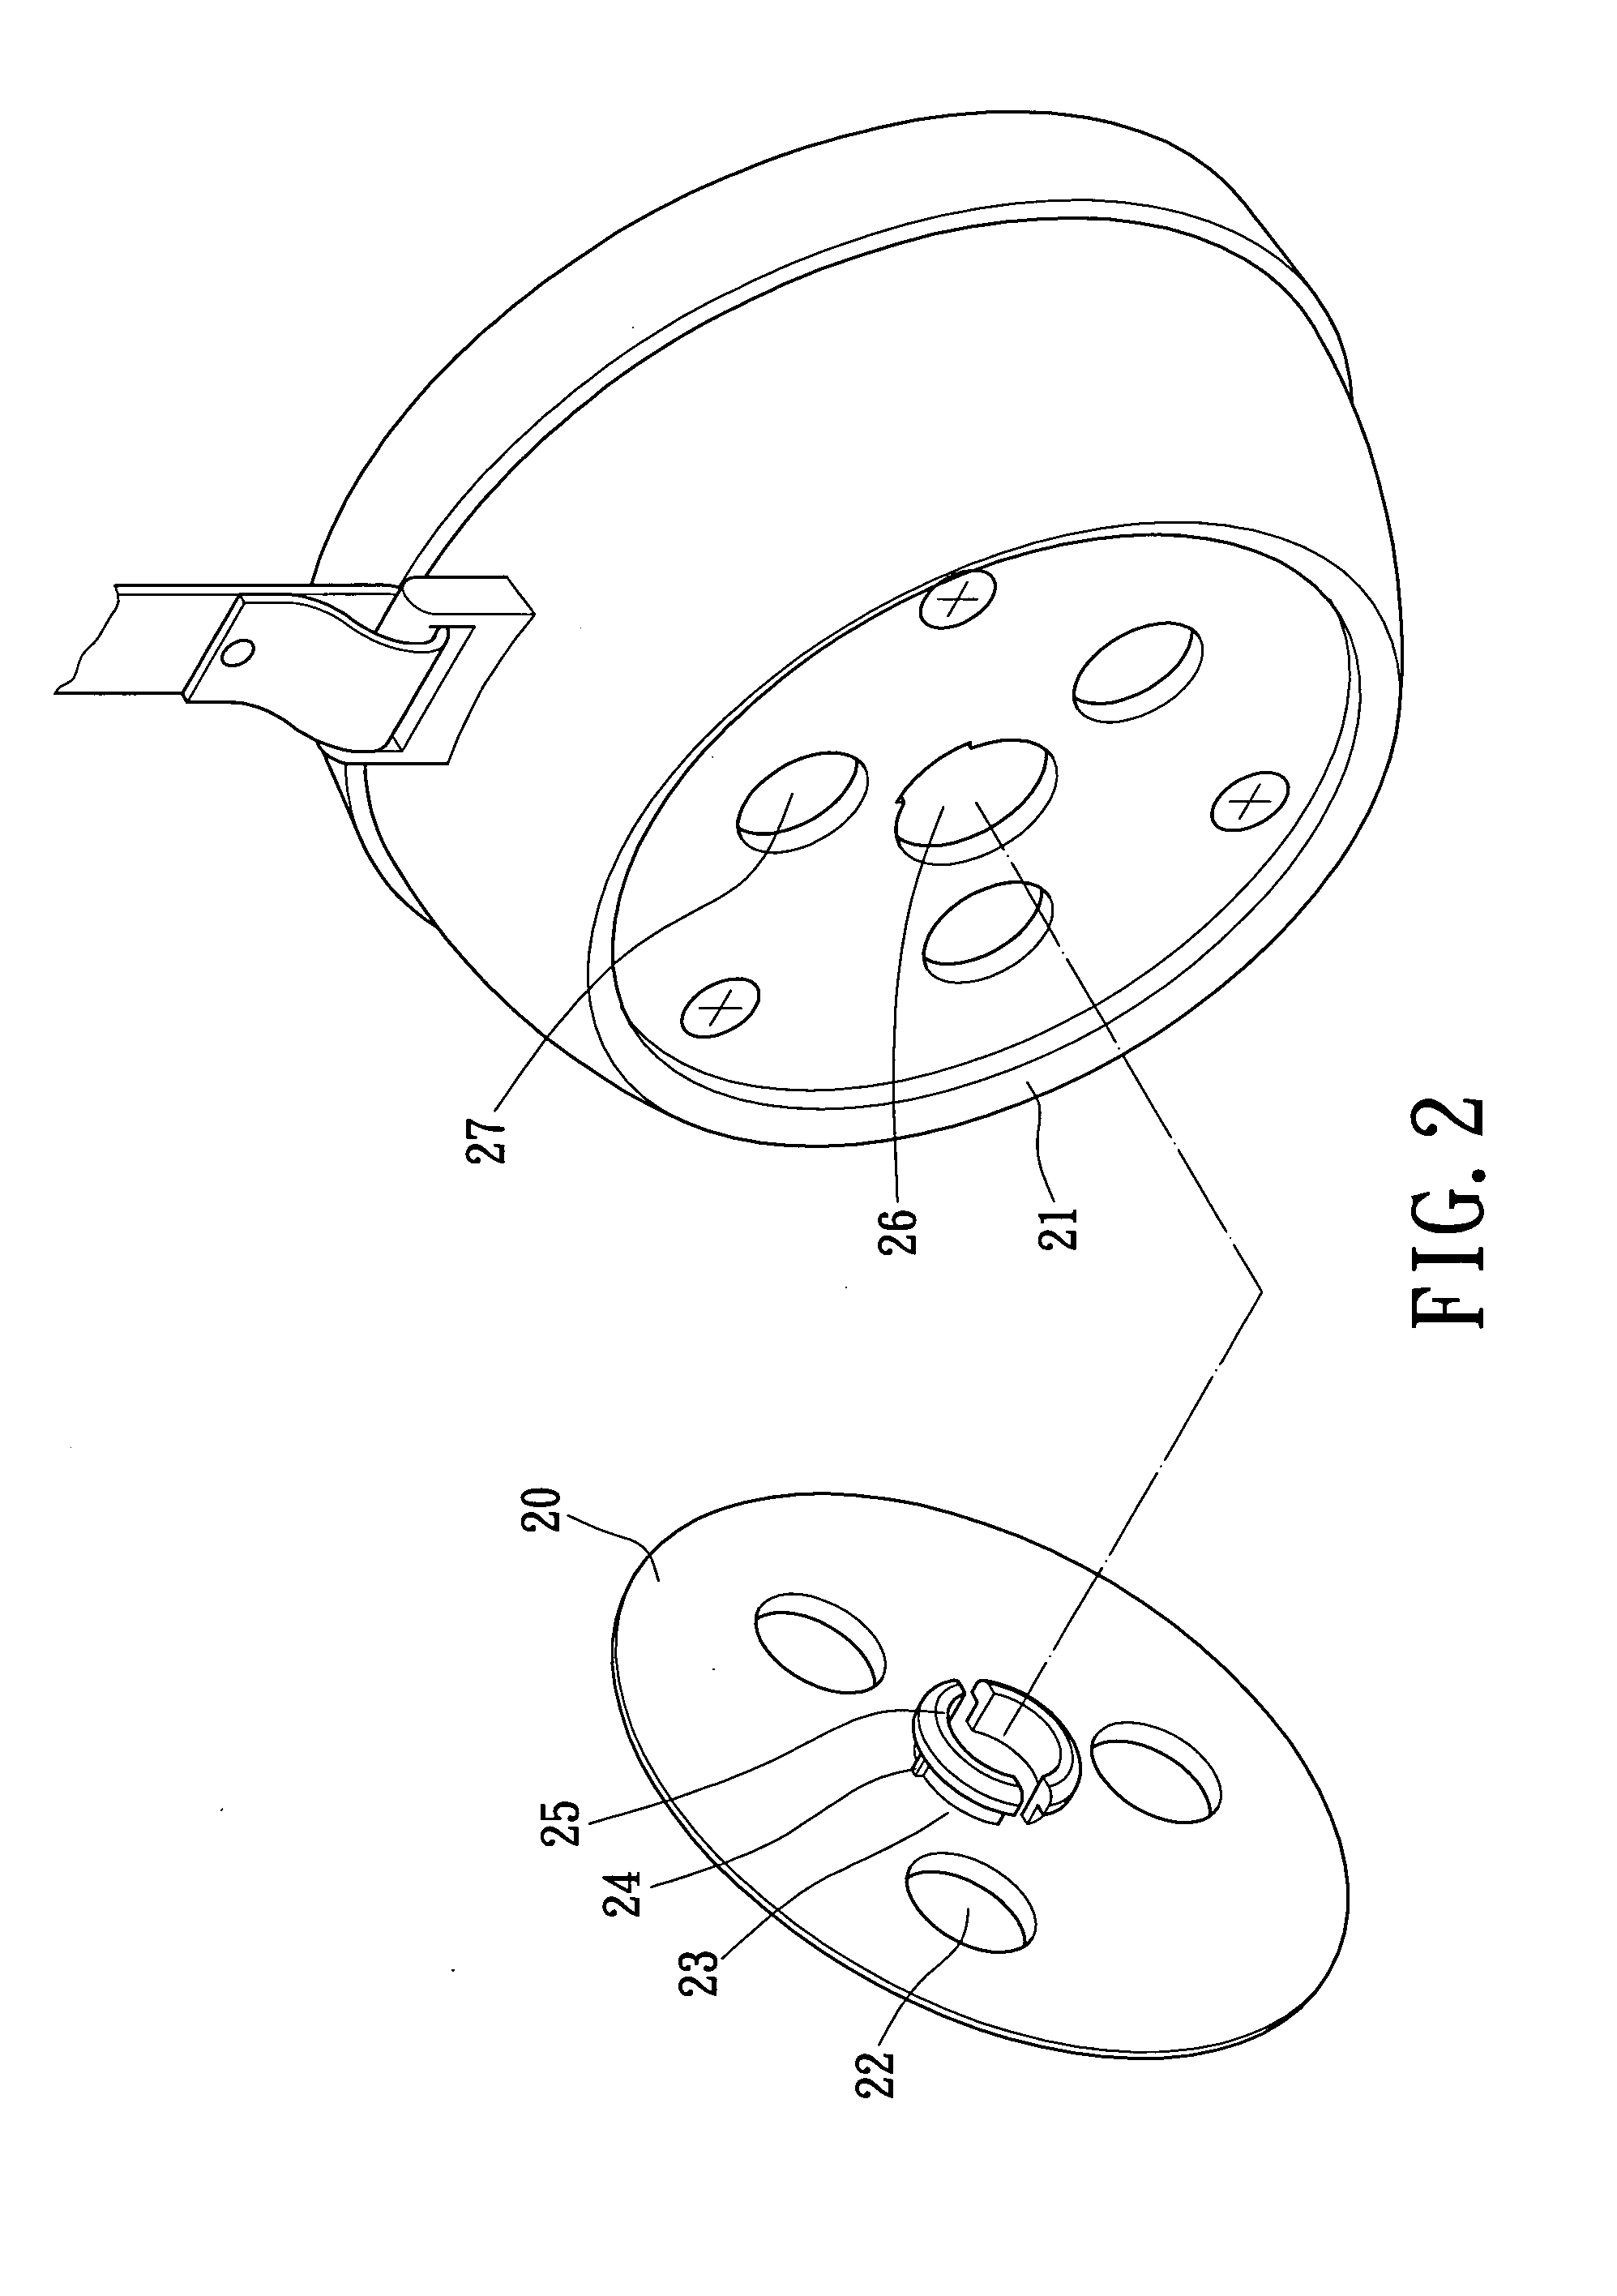 Modified earphone structure having closable opening